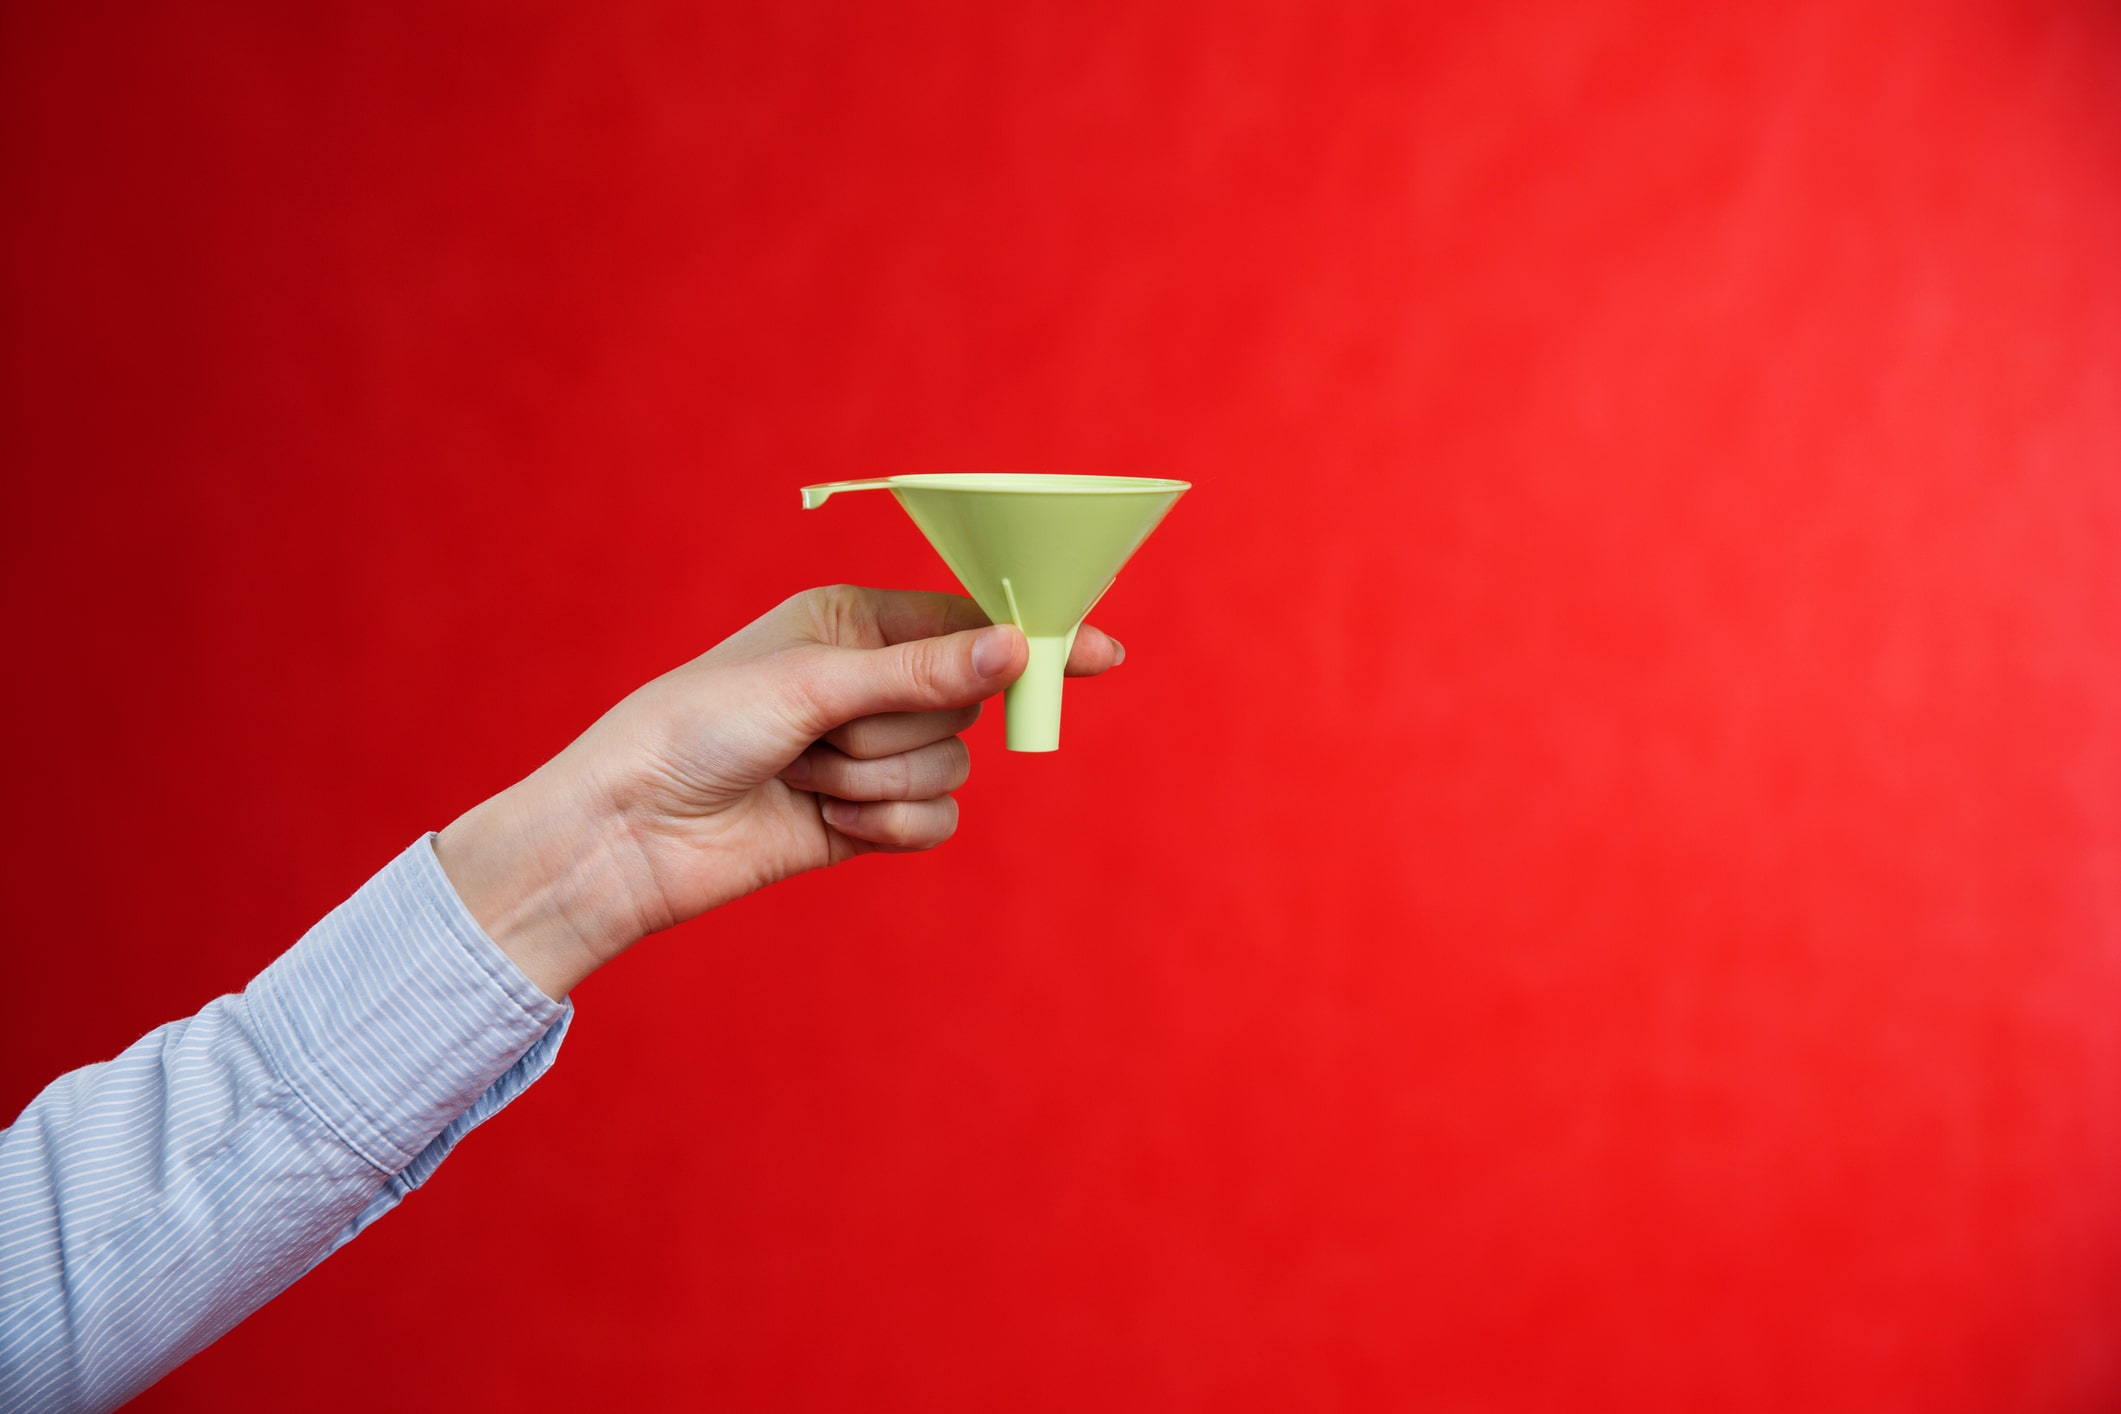 6 Reasons Why Top-of-Funnel Content Delivers Leads and Sales